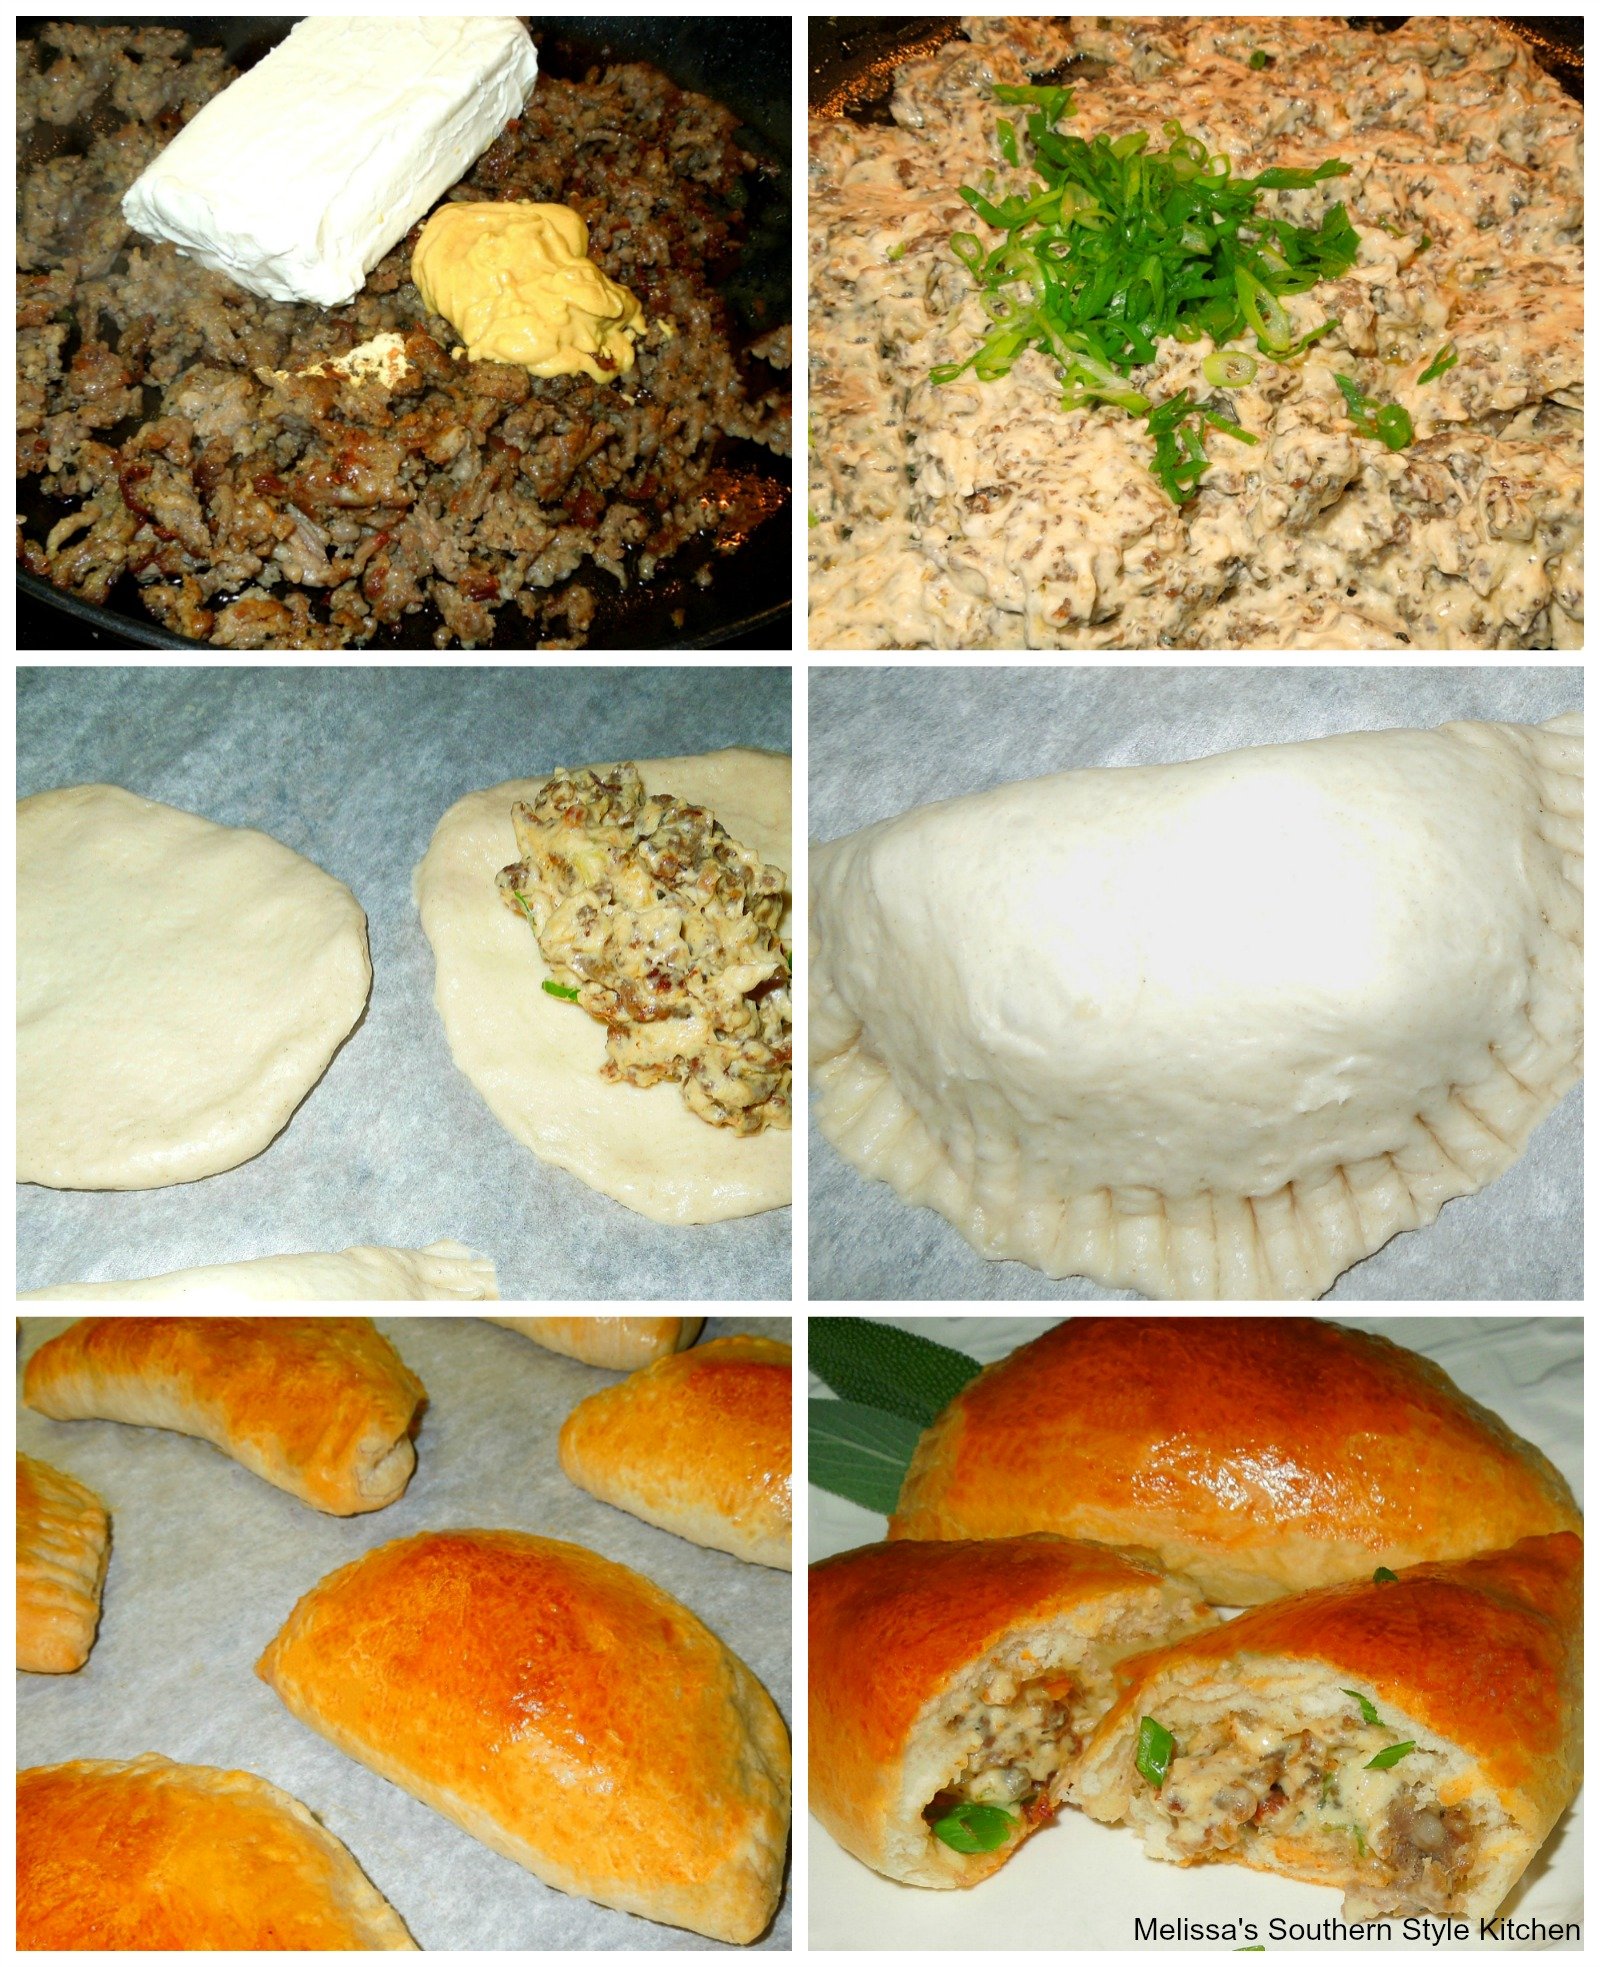 Step-by-step preparation images and ingredients for Breakfast Pastries